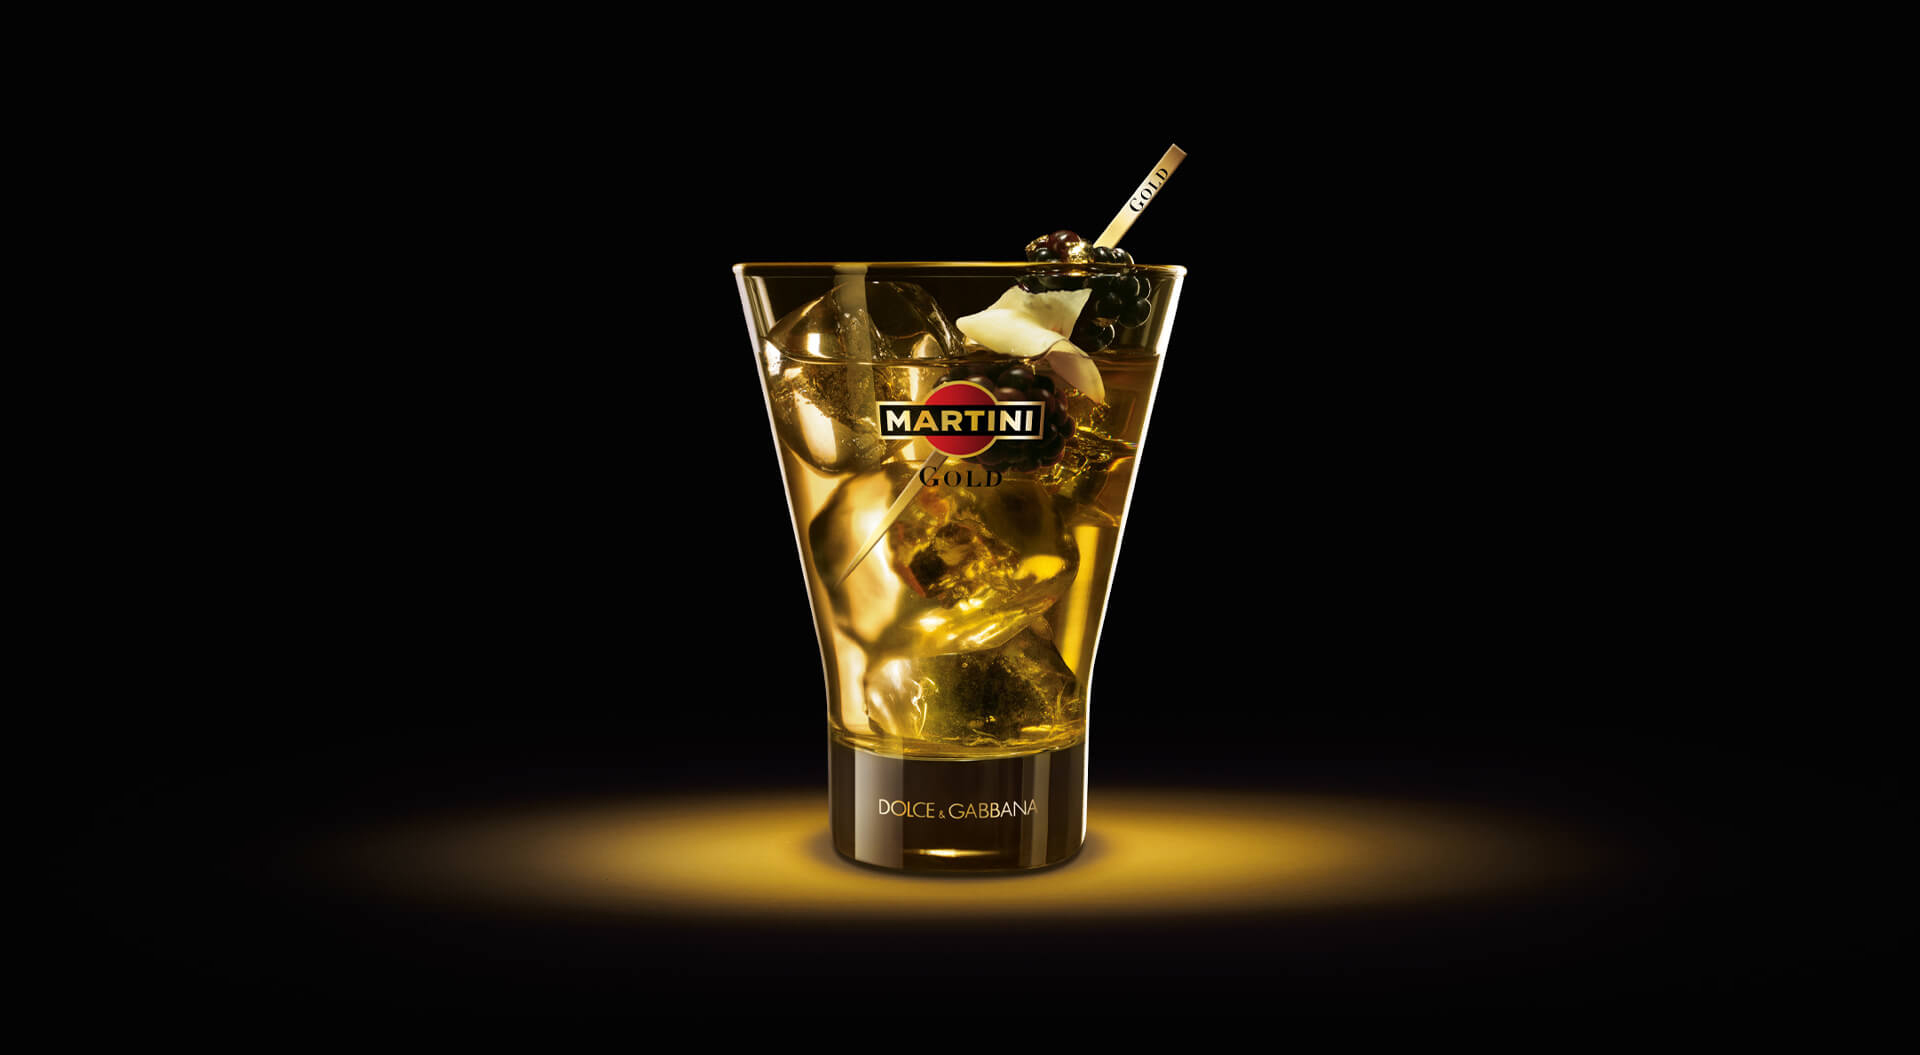 Martini Gold the new taste Dolce & Gabbana brand identity, drinks promotion photography for Bacardi Global Travel Retail